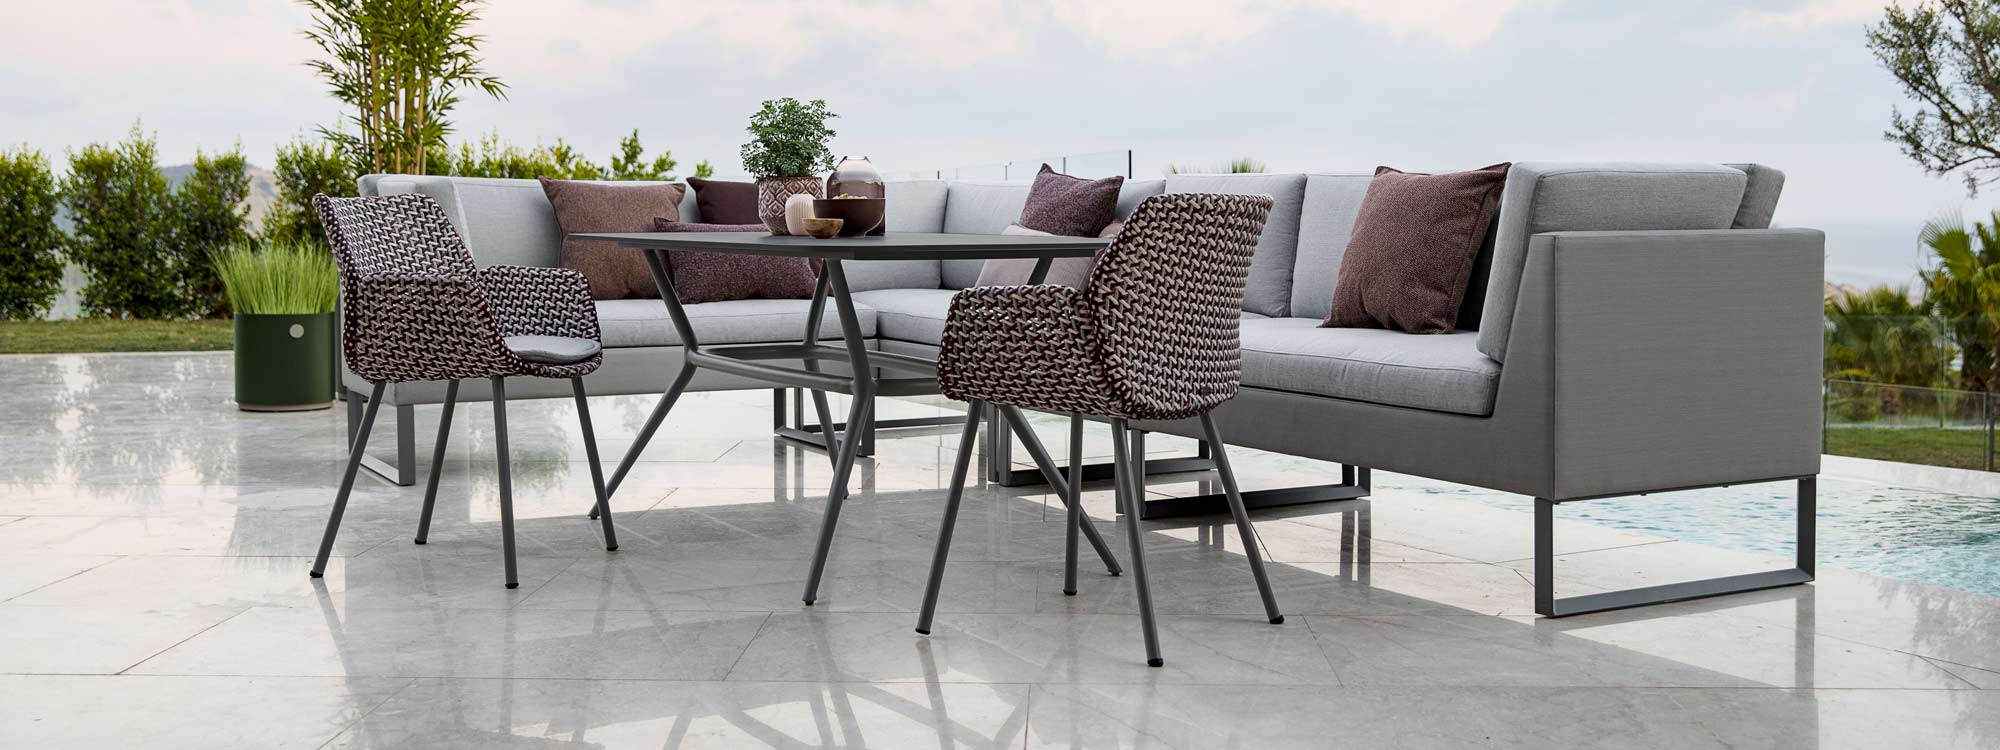 Image of Joy rectangular dining table and Connect dining sofa and Vibe garden chairs by Cane-line